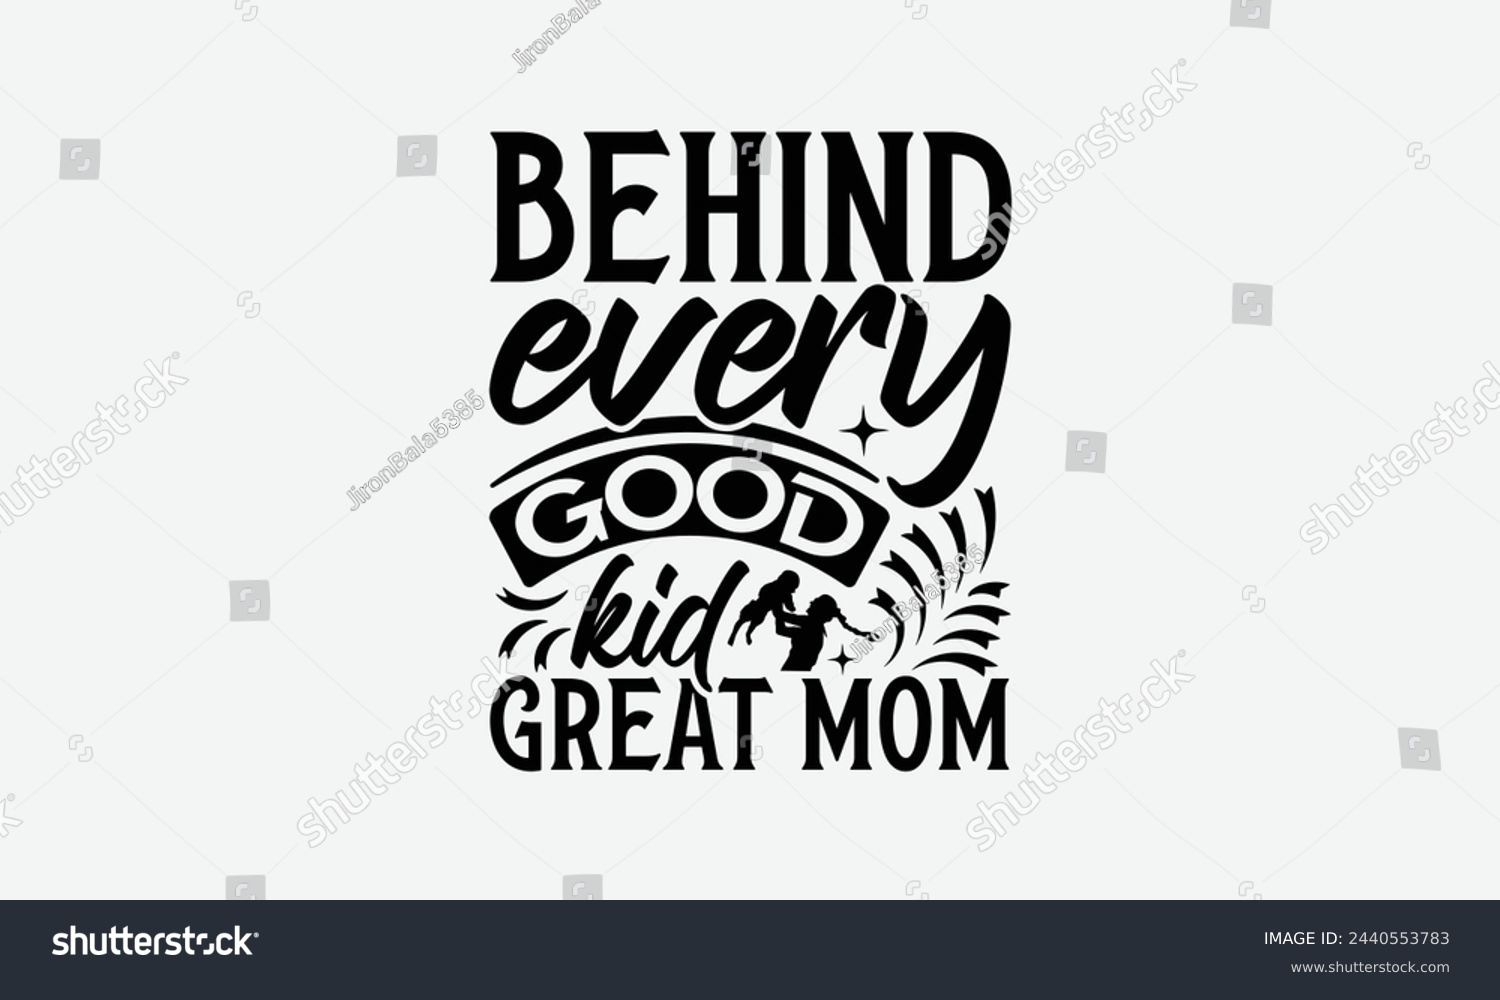 SVG of Behind every good kid great mom - MOM T-shirt Design,  Isolated on white background, This illustration can be used as a print on t-shirts and bags, cover book, templet, stationary or as a poster. svg